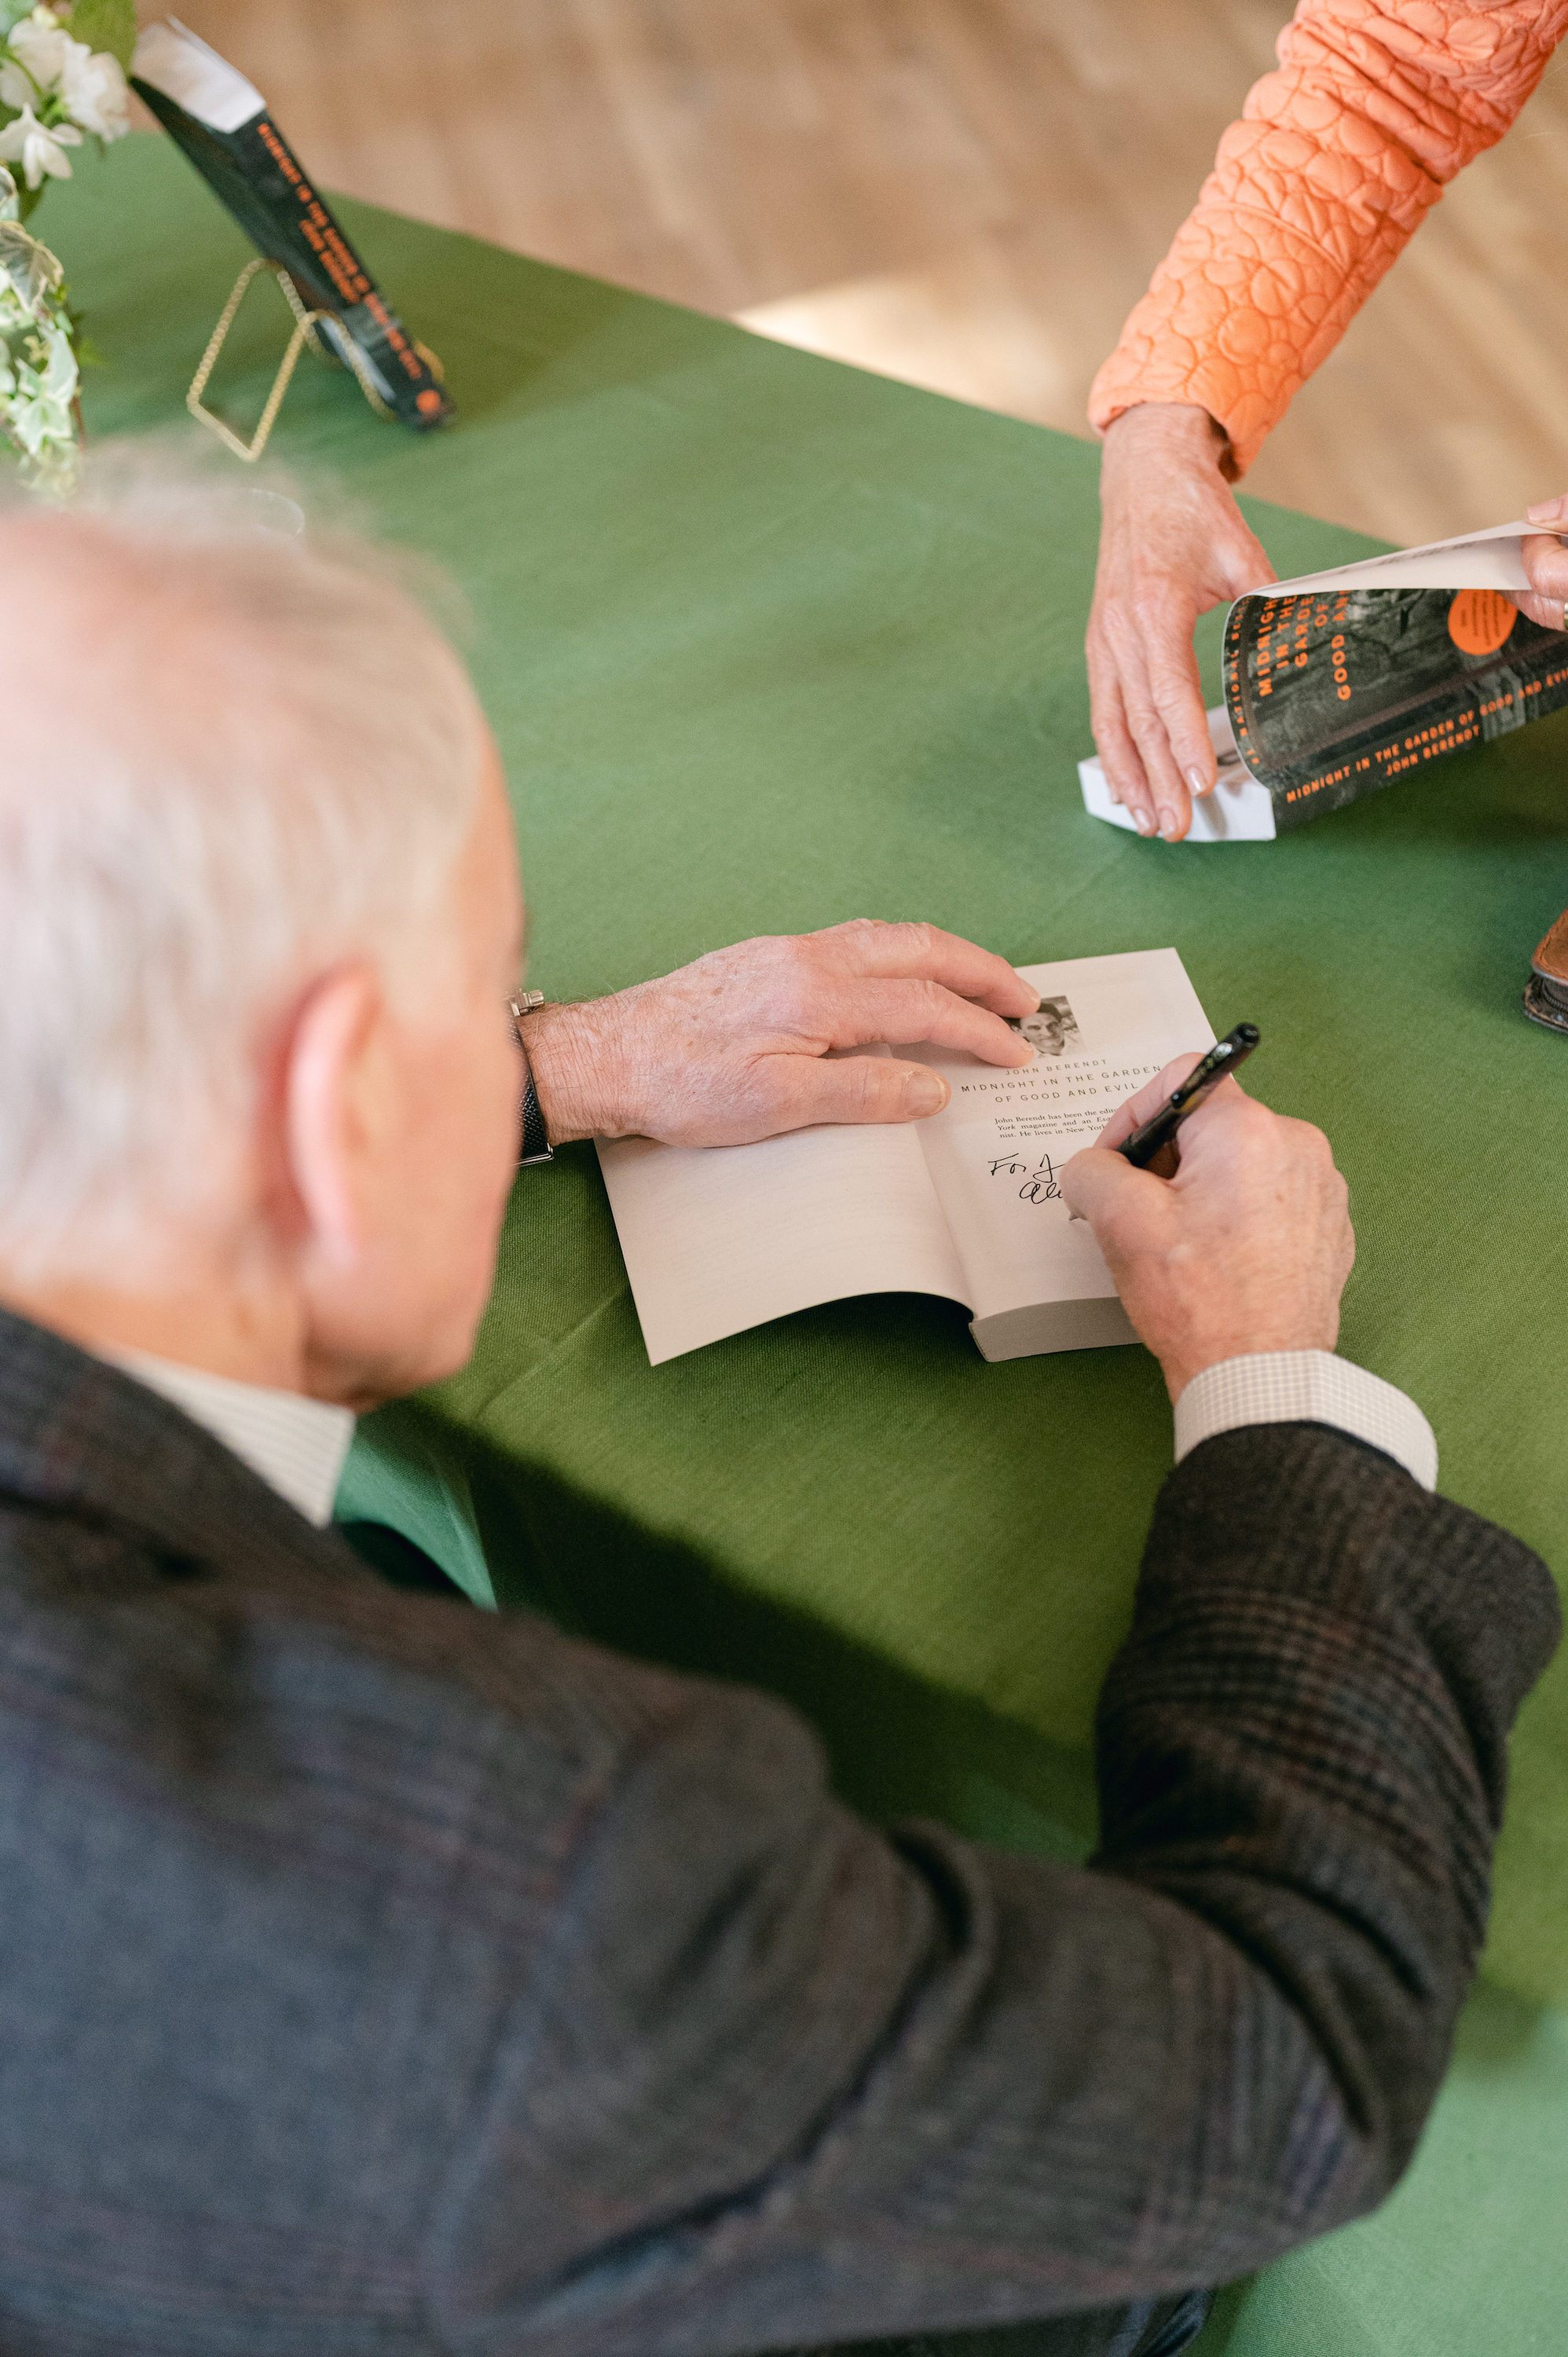 A man signs a copy of a book on a green table